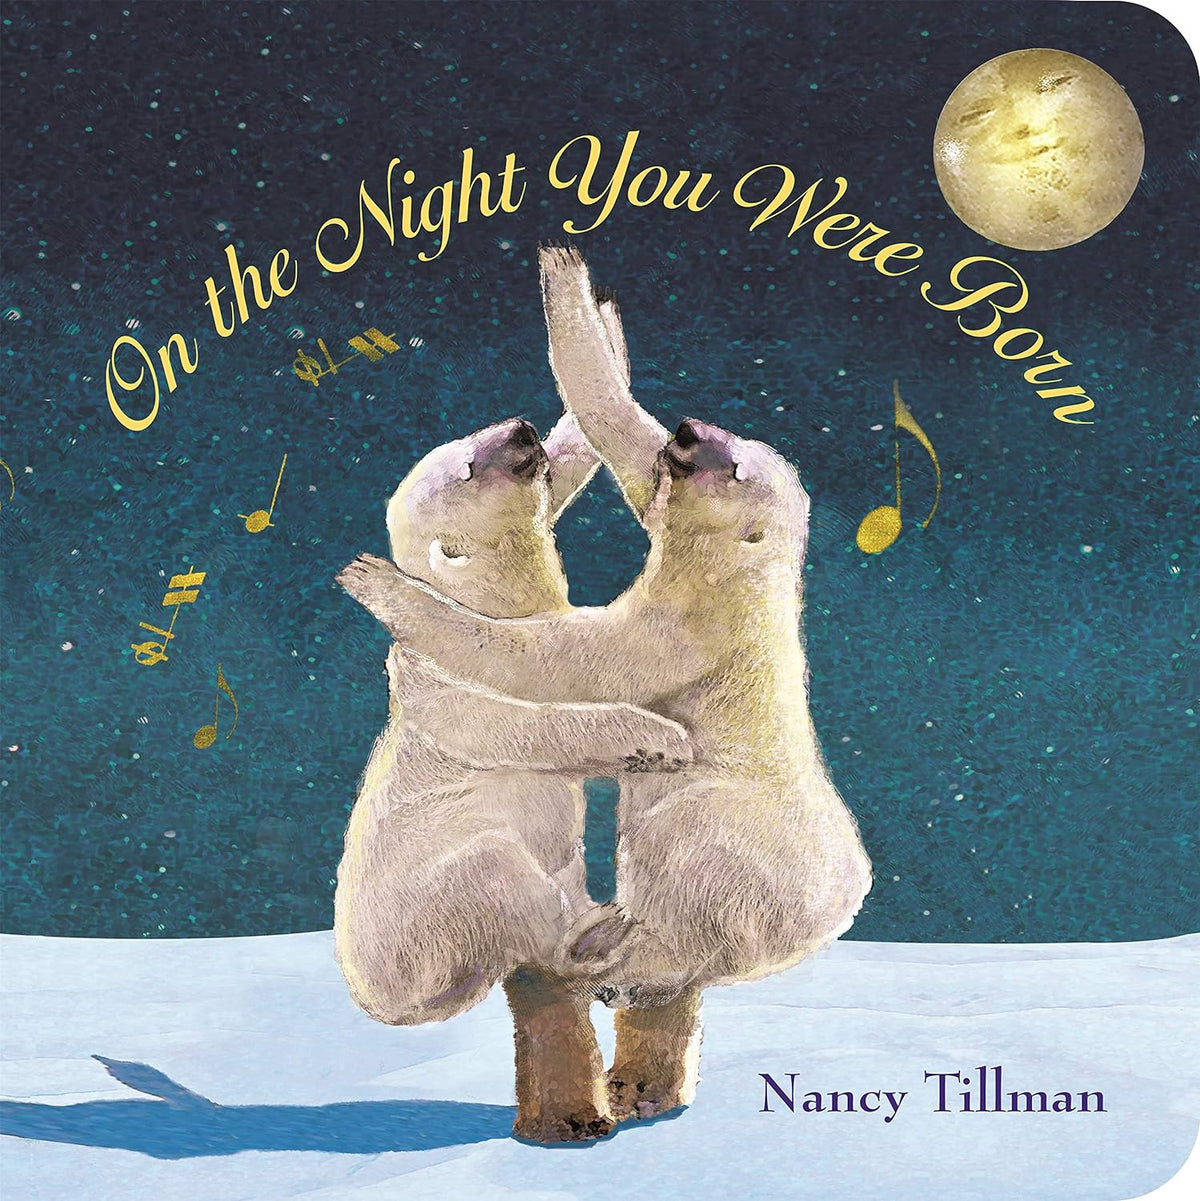 On The Night You Were Born by Nancy Tillman- Padded Board Book